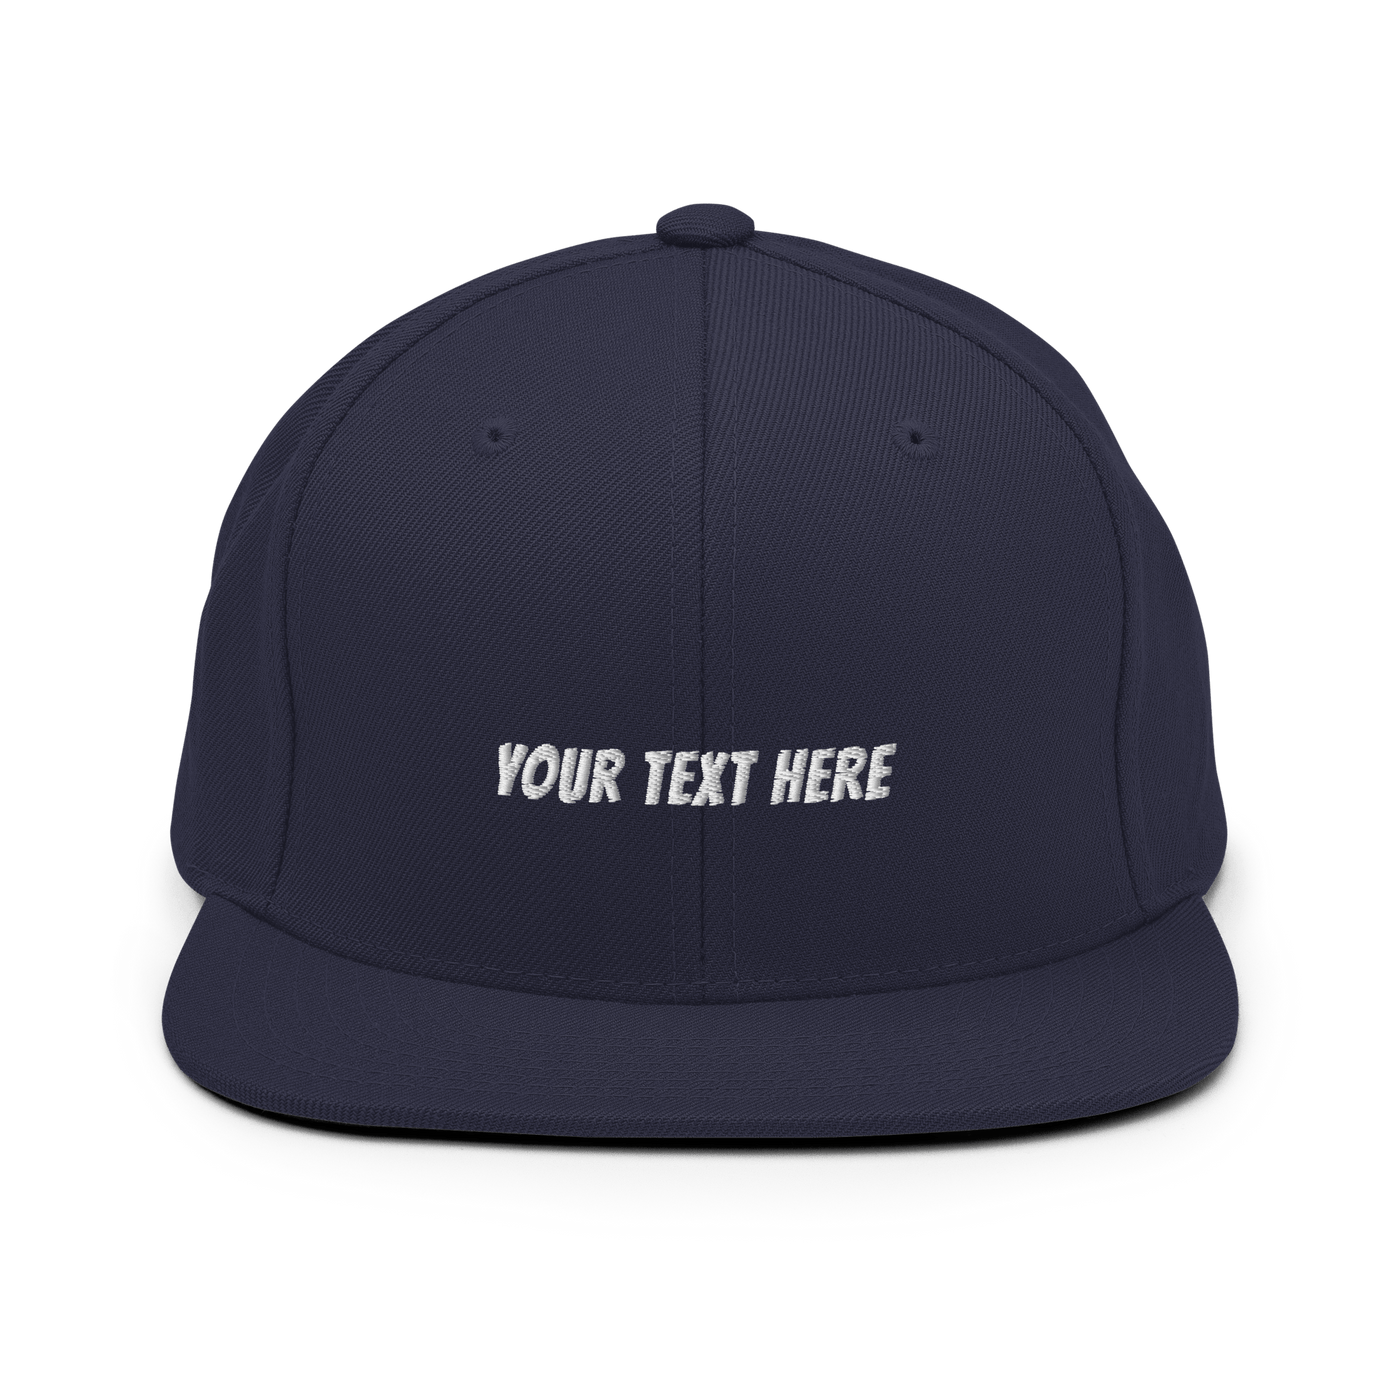 Customize Your Own Snapback Hat - Banger Font - Navy - - Just Another Cap Store